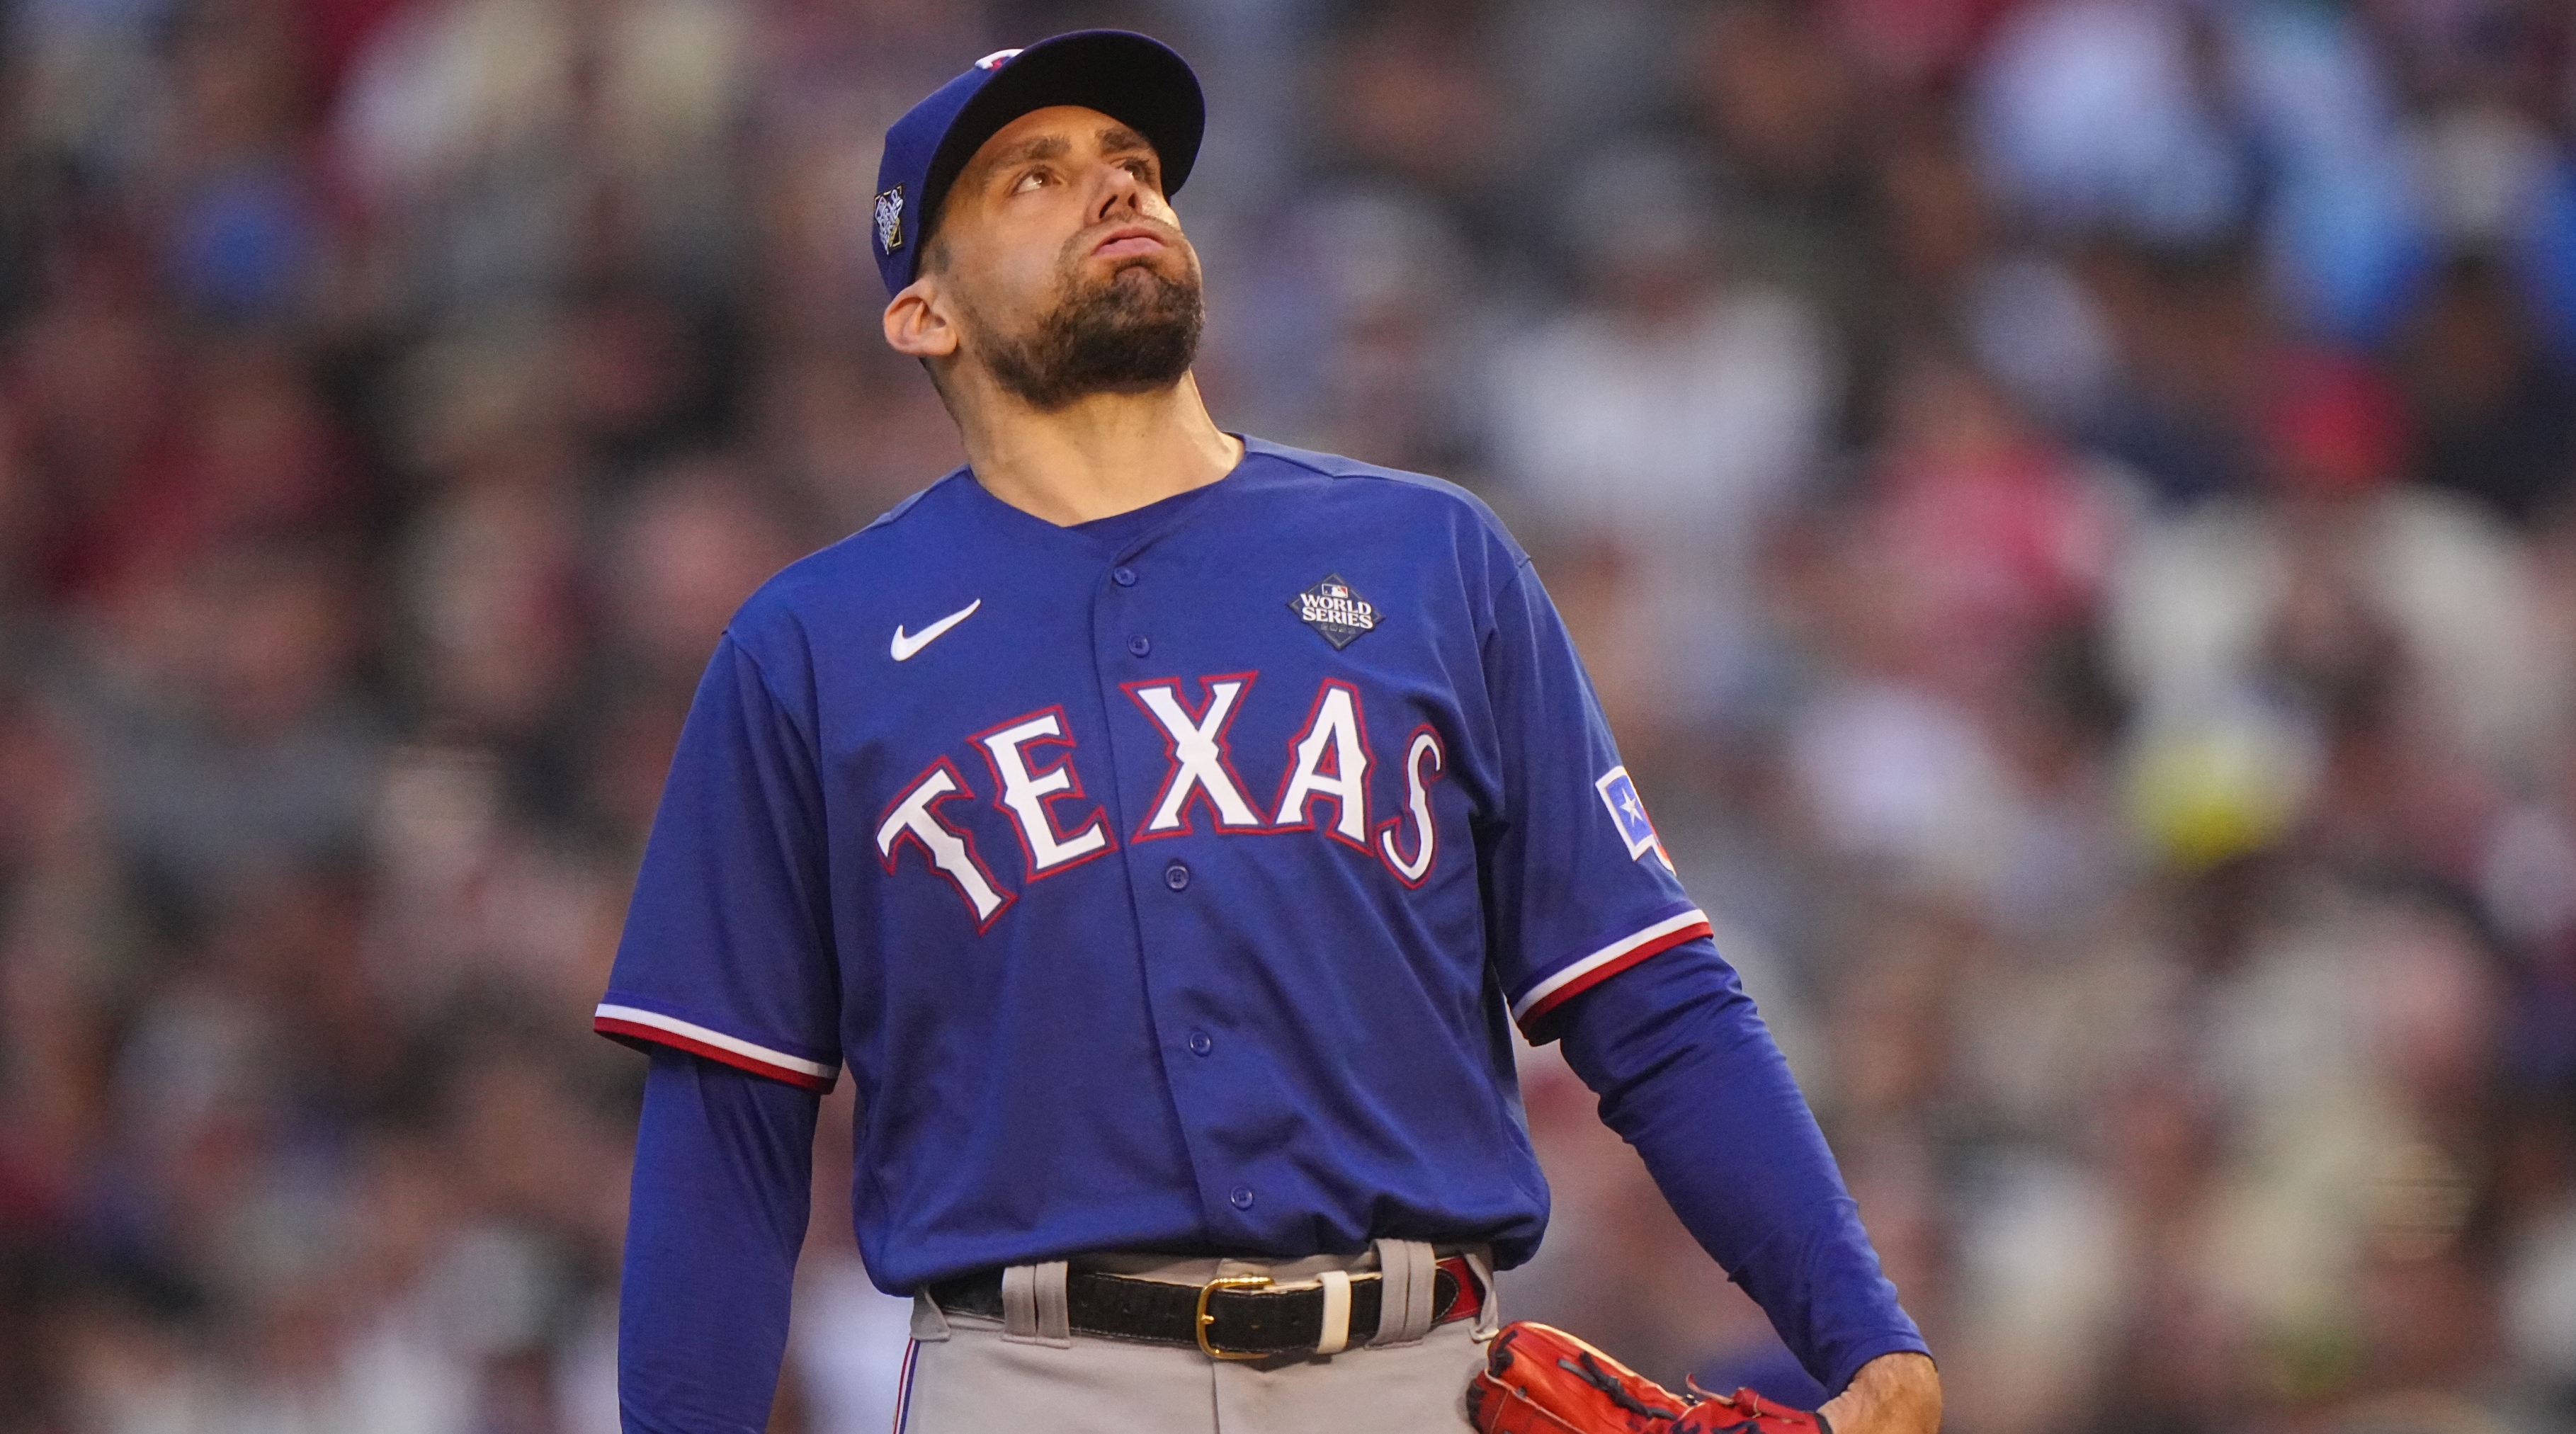 Rangers starting pitcher Nathan Eovaldi looks up while on the mound during Game 5 of the World Series.